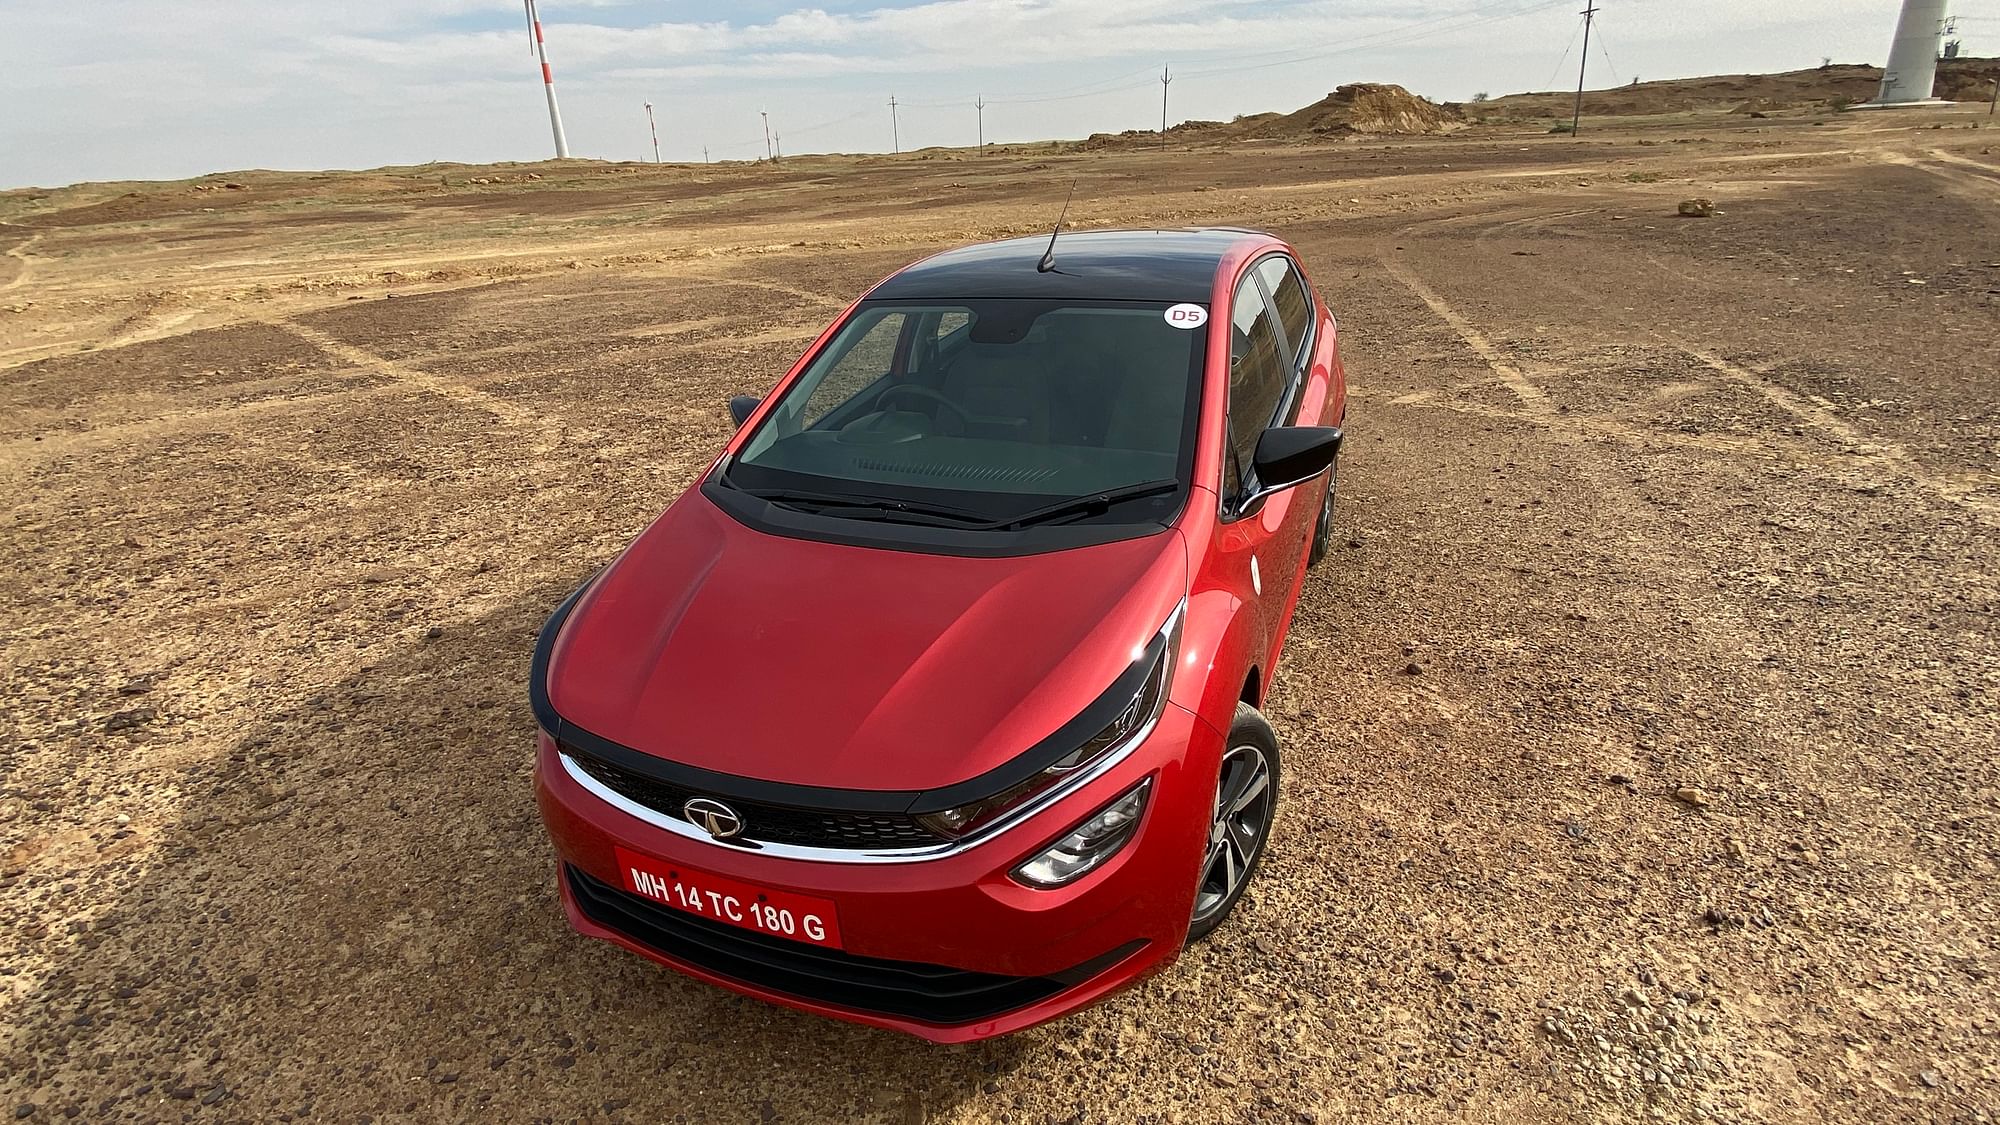 The prices for the Tata Altroz will be out in the third week of January.